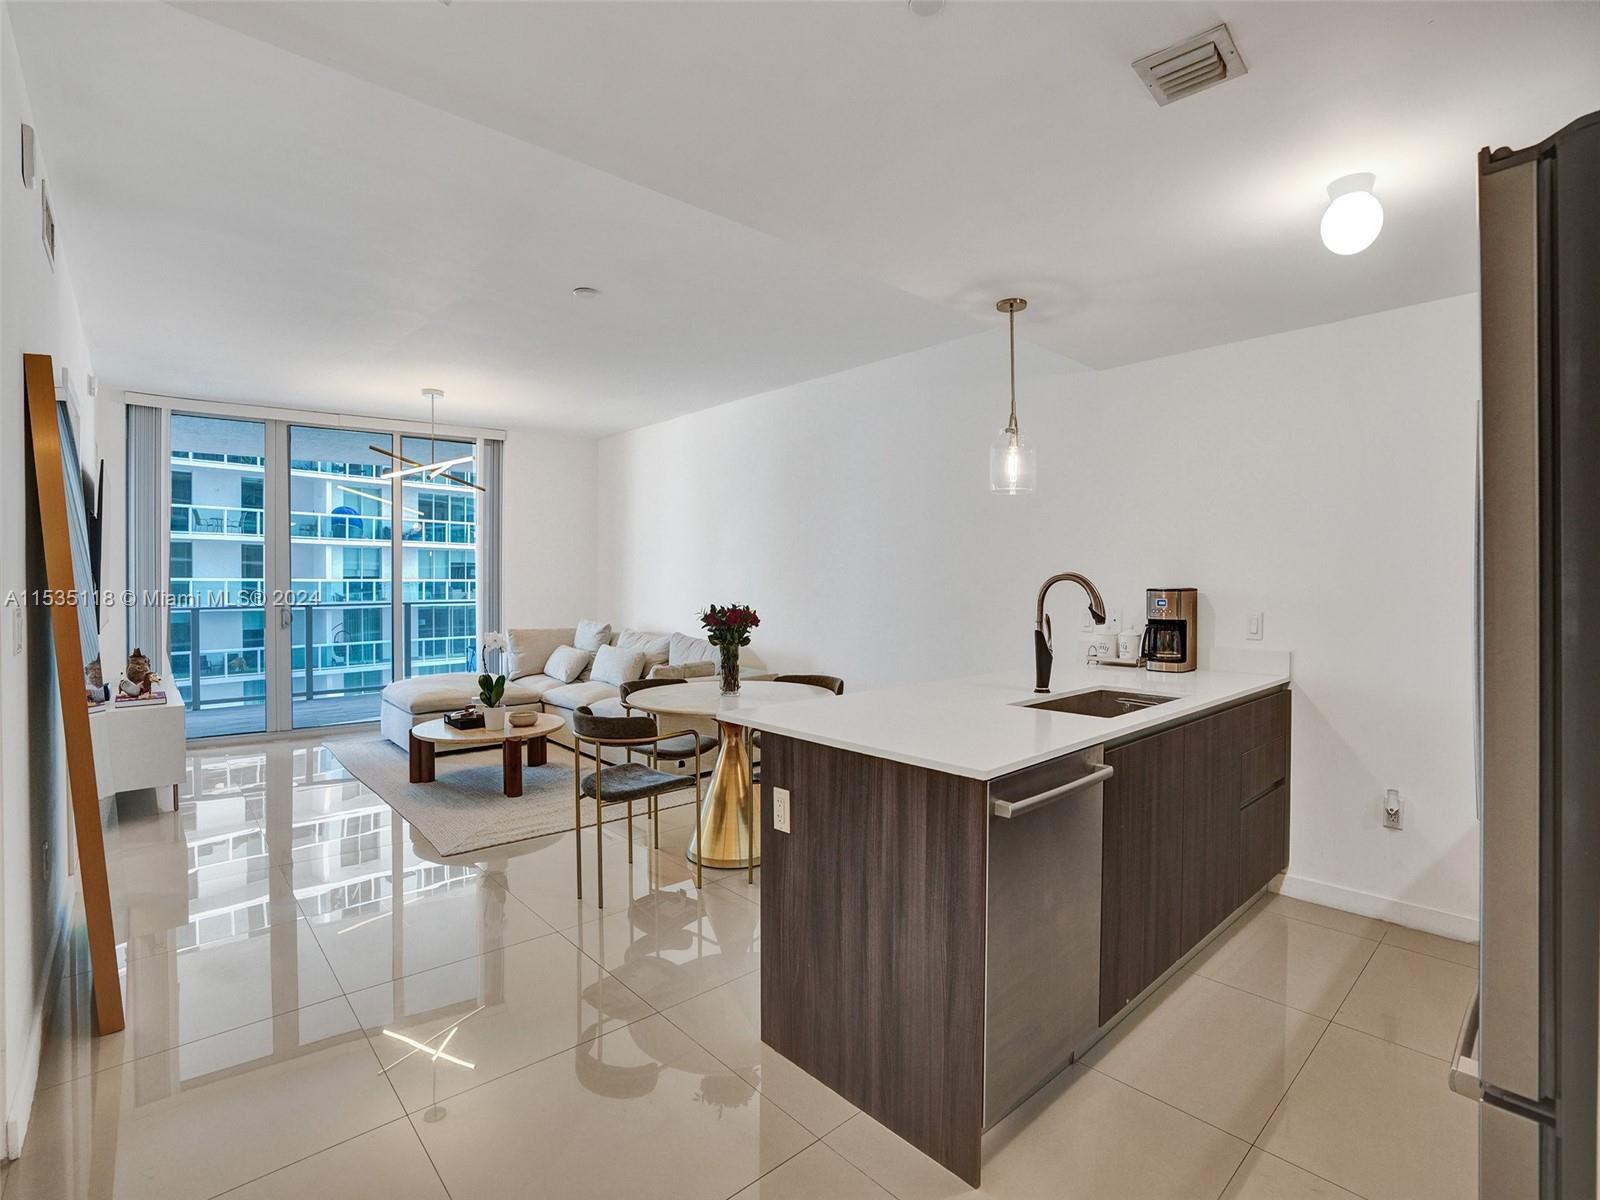 Beautiful 1bed + Converted Den + 2 full Bath Unit. Porcelain title throughout and a oversized balcony overlooking the bay and park . Aria On The Bay has amazing amenities including Gym, Yoga studio, Movie theatre, sunset and sunrise pool, kids playroom , social areas, business center and much more.